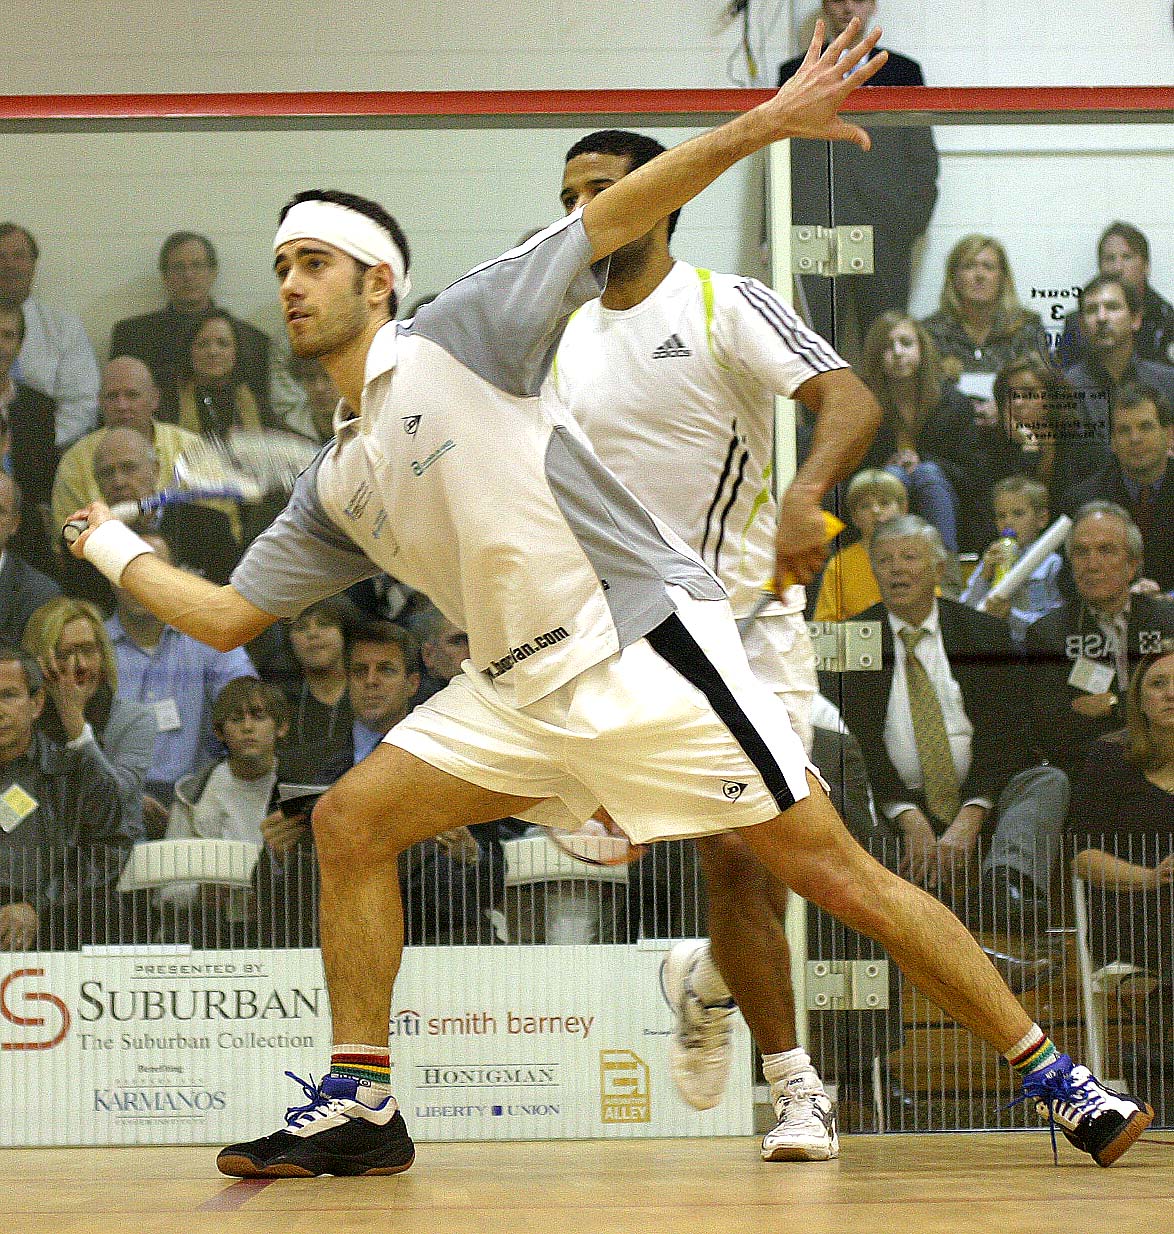 With both Adrian Grant and Borja Golan (with headband) moving well and attacking the front corners, the final of the Motor City was contentious from the start. But Golan made the most of his first visit to Detroit, taking the title in four games. In the semfinals, Golan stopped the lightning-quick Ollie Tuominen (above) in a decisive three games.